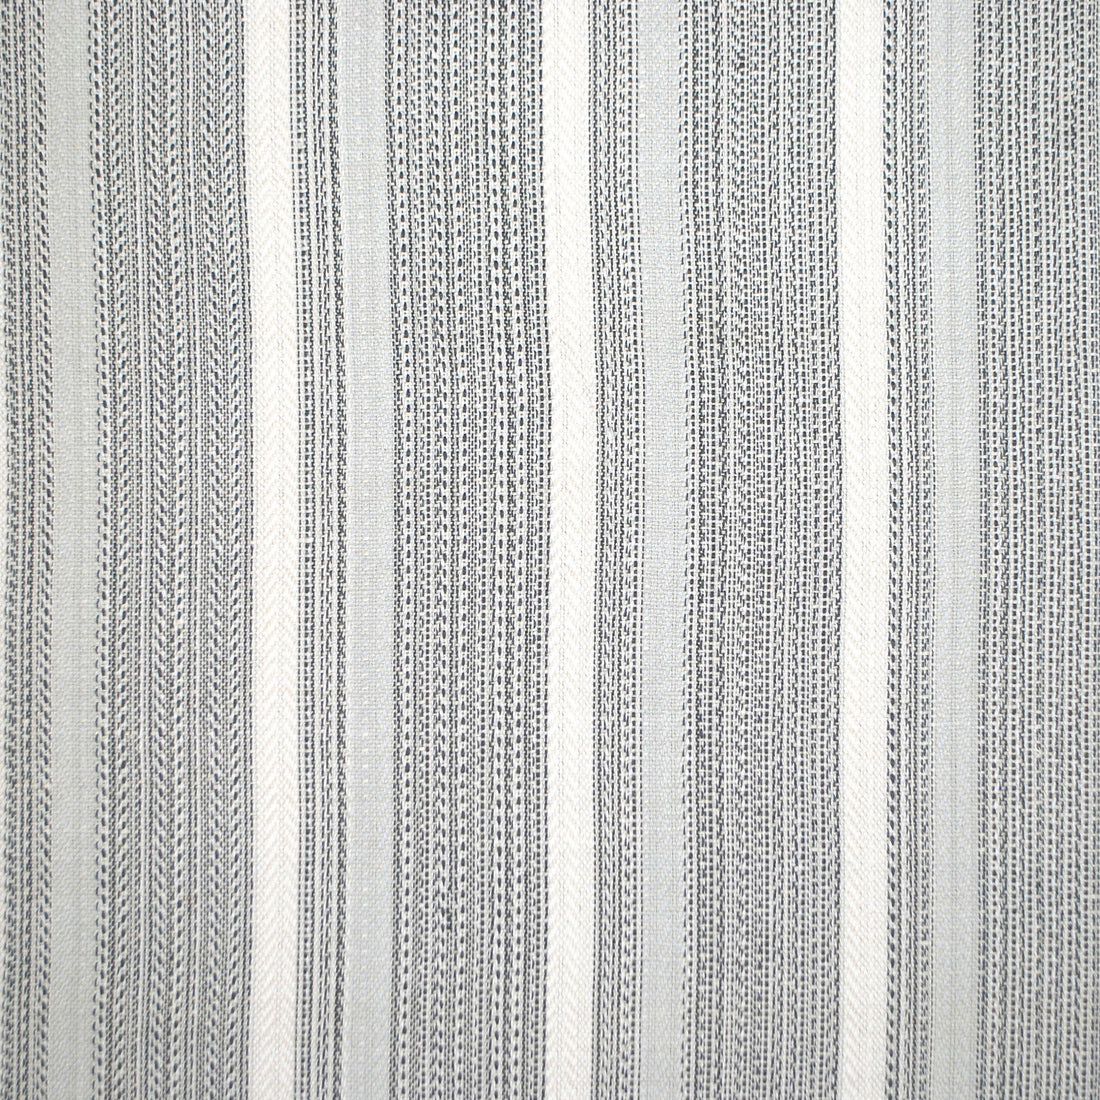 Winfield Hall fabric in pewter color - pattern number PQ 0002A400 - by Scalamandre in the Old World Weavers collection